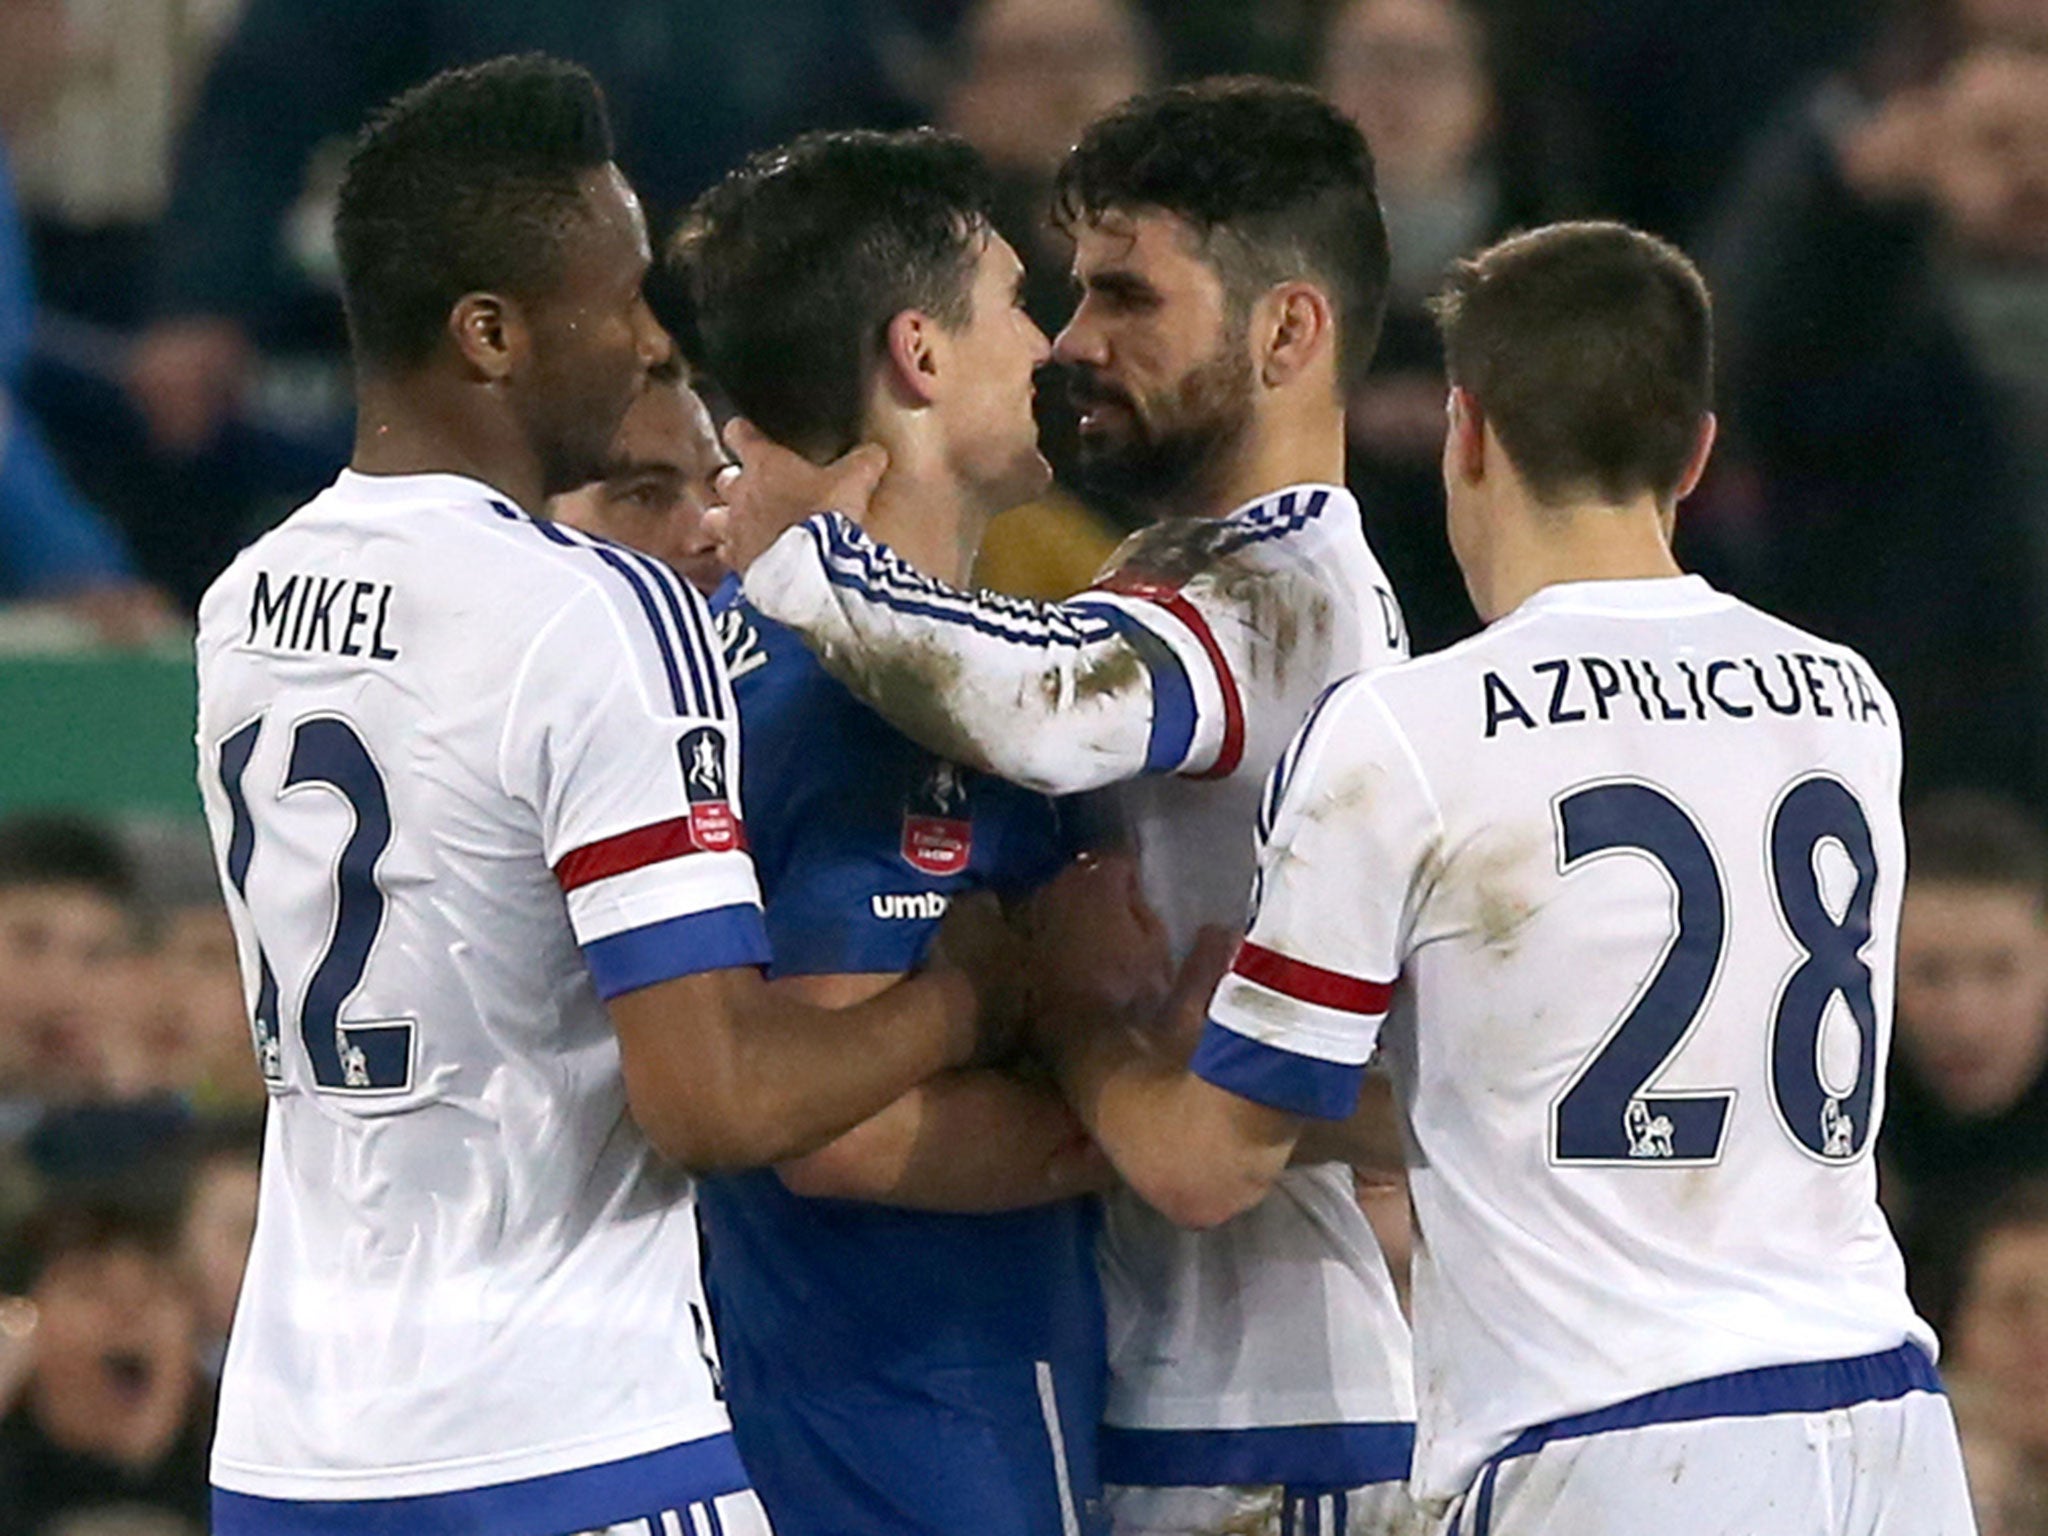 Chelsea's Diego Costa, centre right, and Everton's Gareth Barry getting involved in a altercation